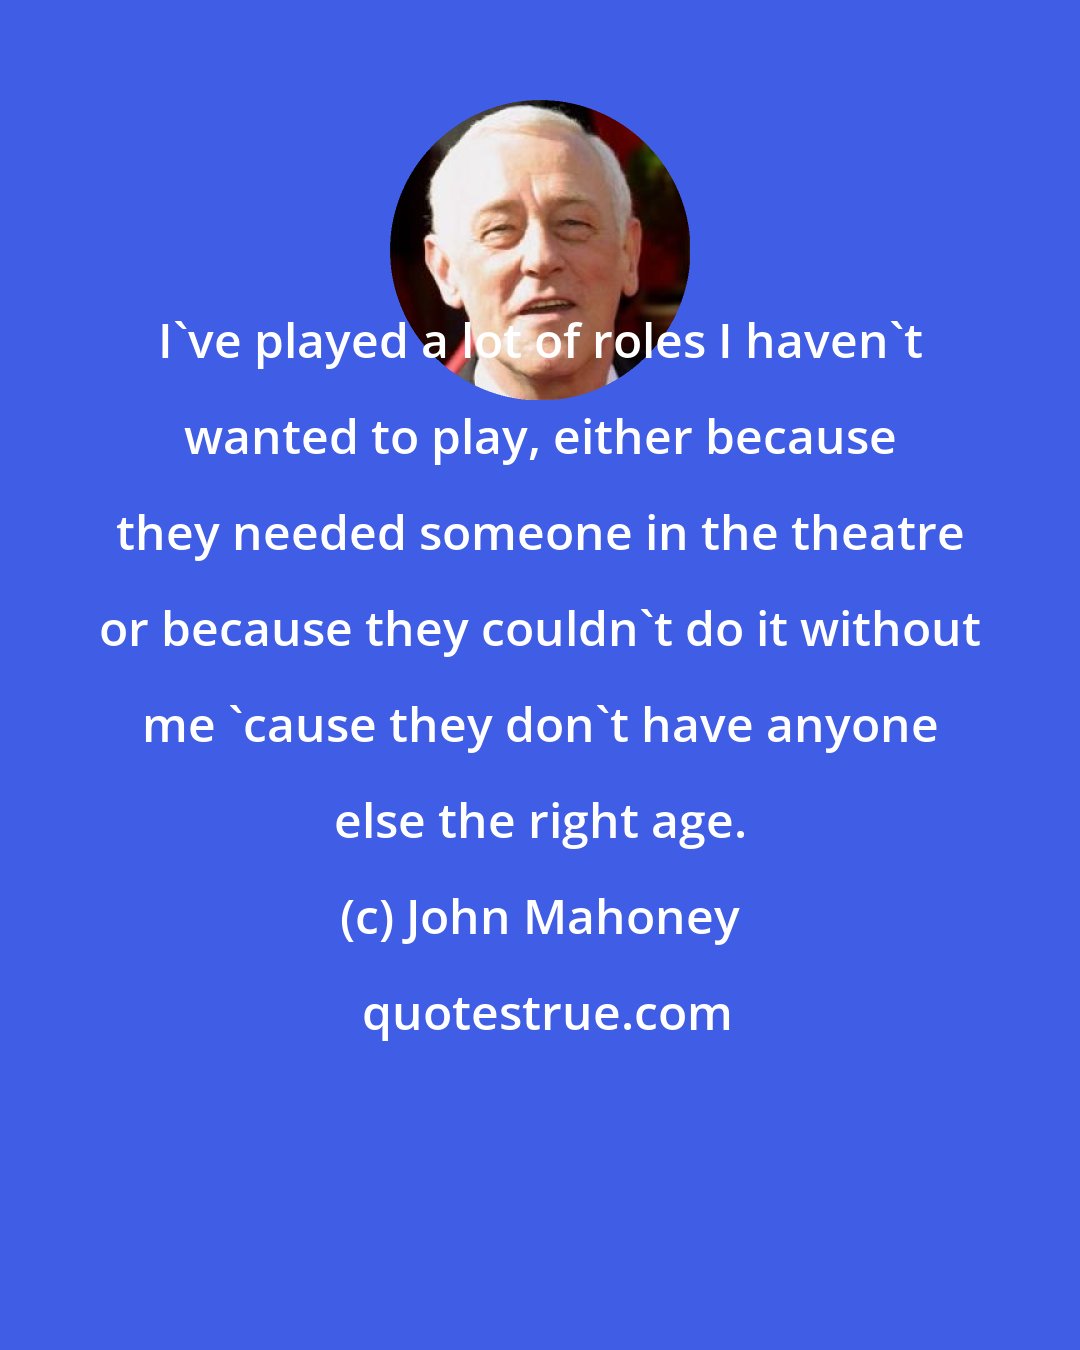 John Mahoney: I've played a lot of roles I haven't wanted to play, either because they needed someone in the theatre or because they couldn't do it without me 'cause they don't have anyone else the right age.